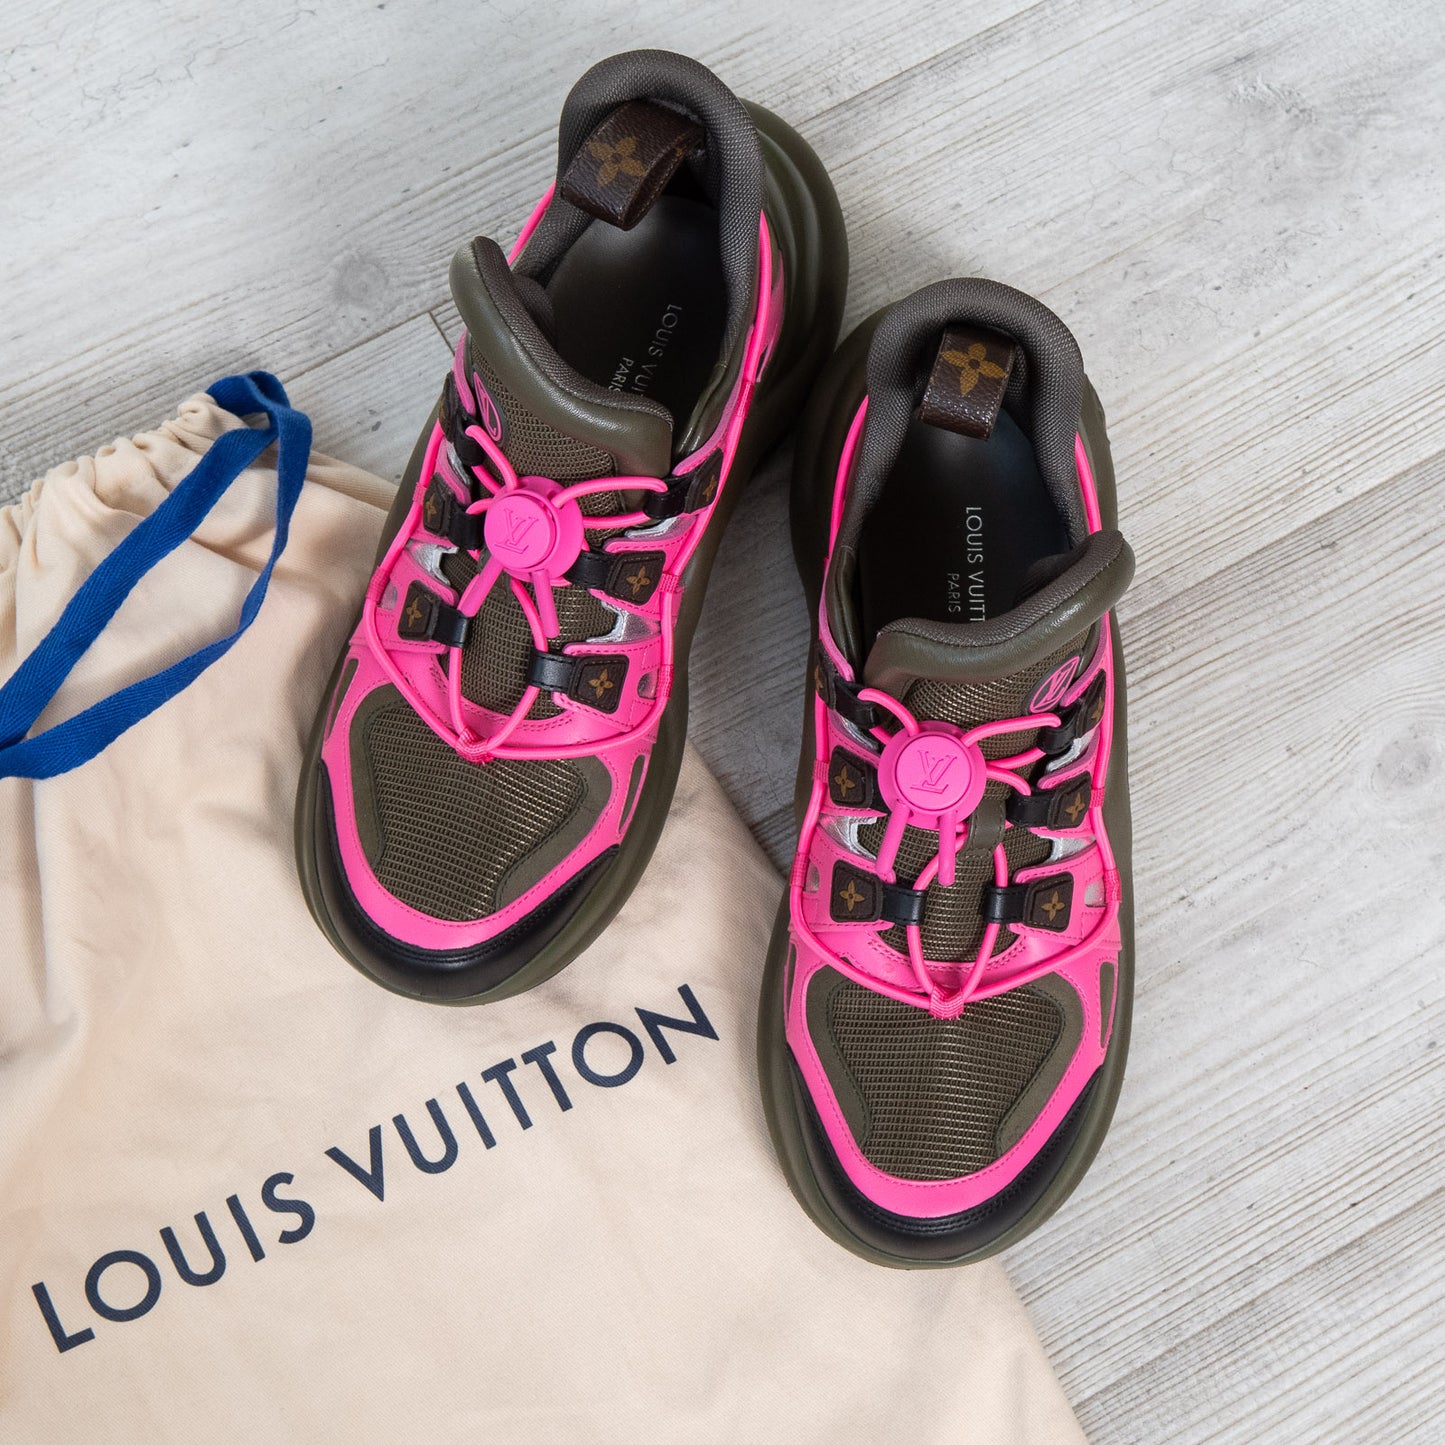 Louis Vuitton Khaki And Pink Archlight Trainers Size 38 - EVEYSPRELOVED